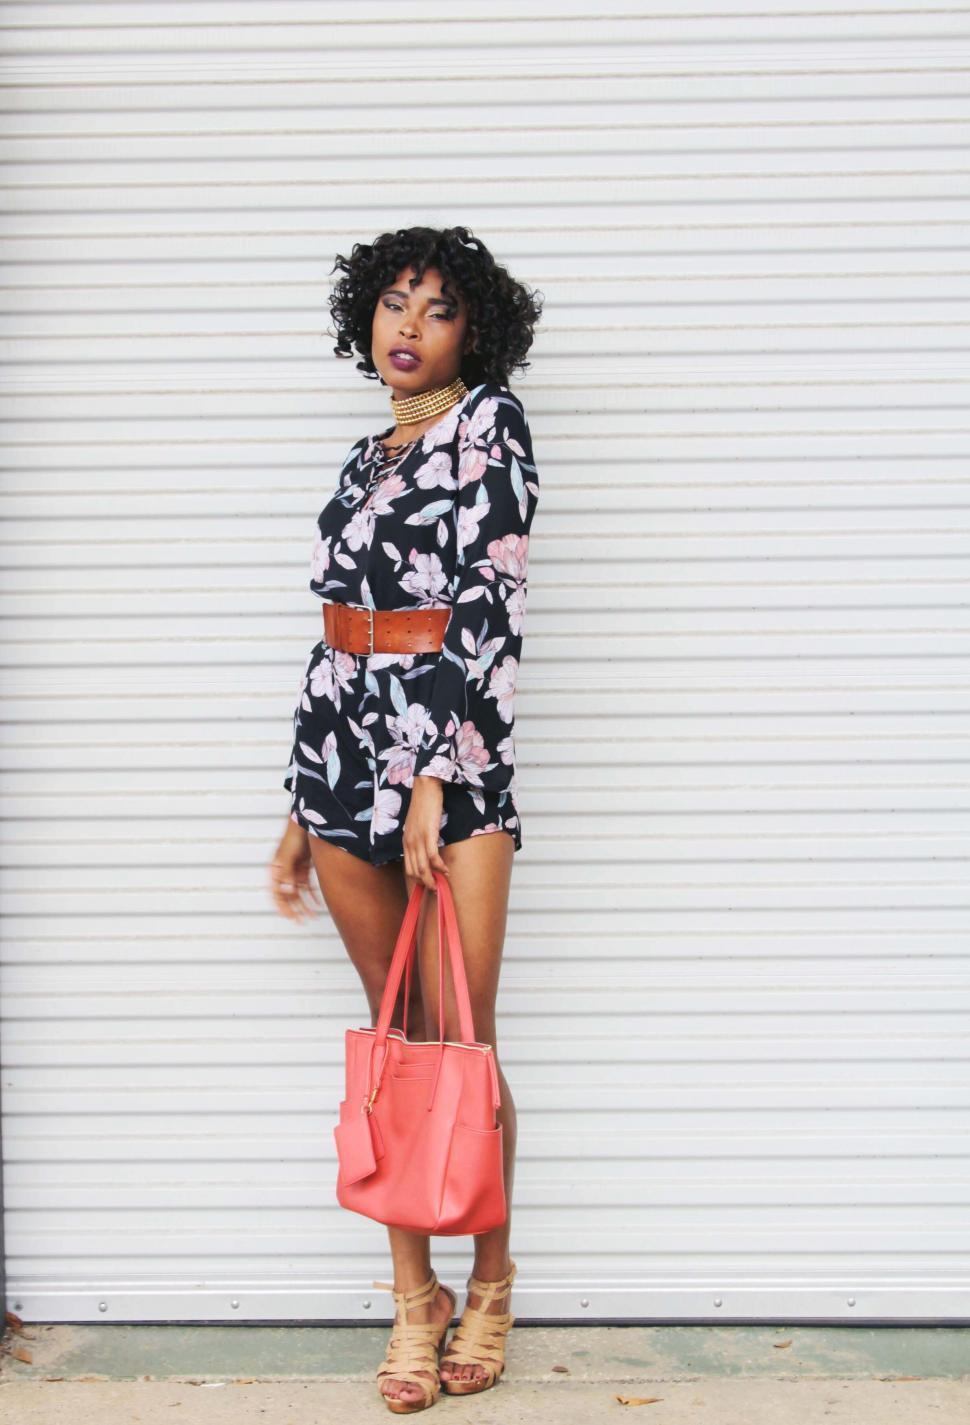 Free Image of Fashionable woman with bag standing by wall 